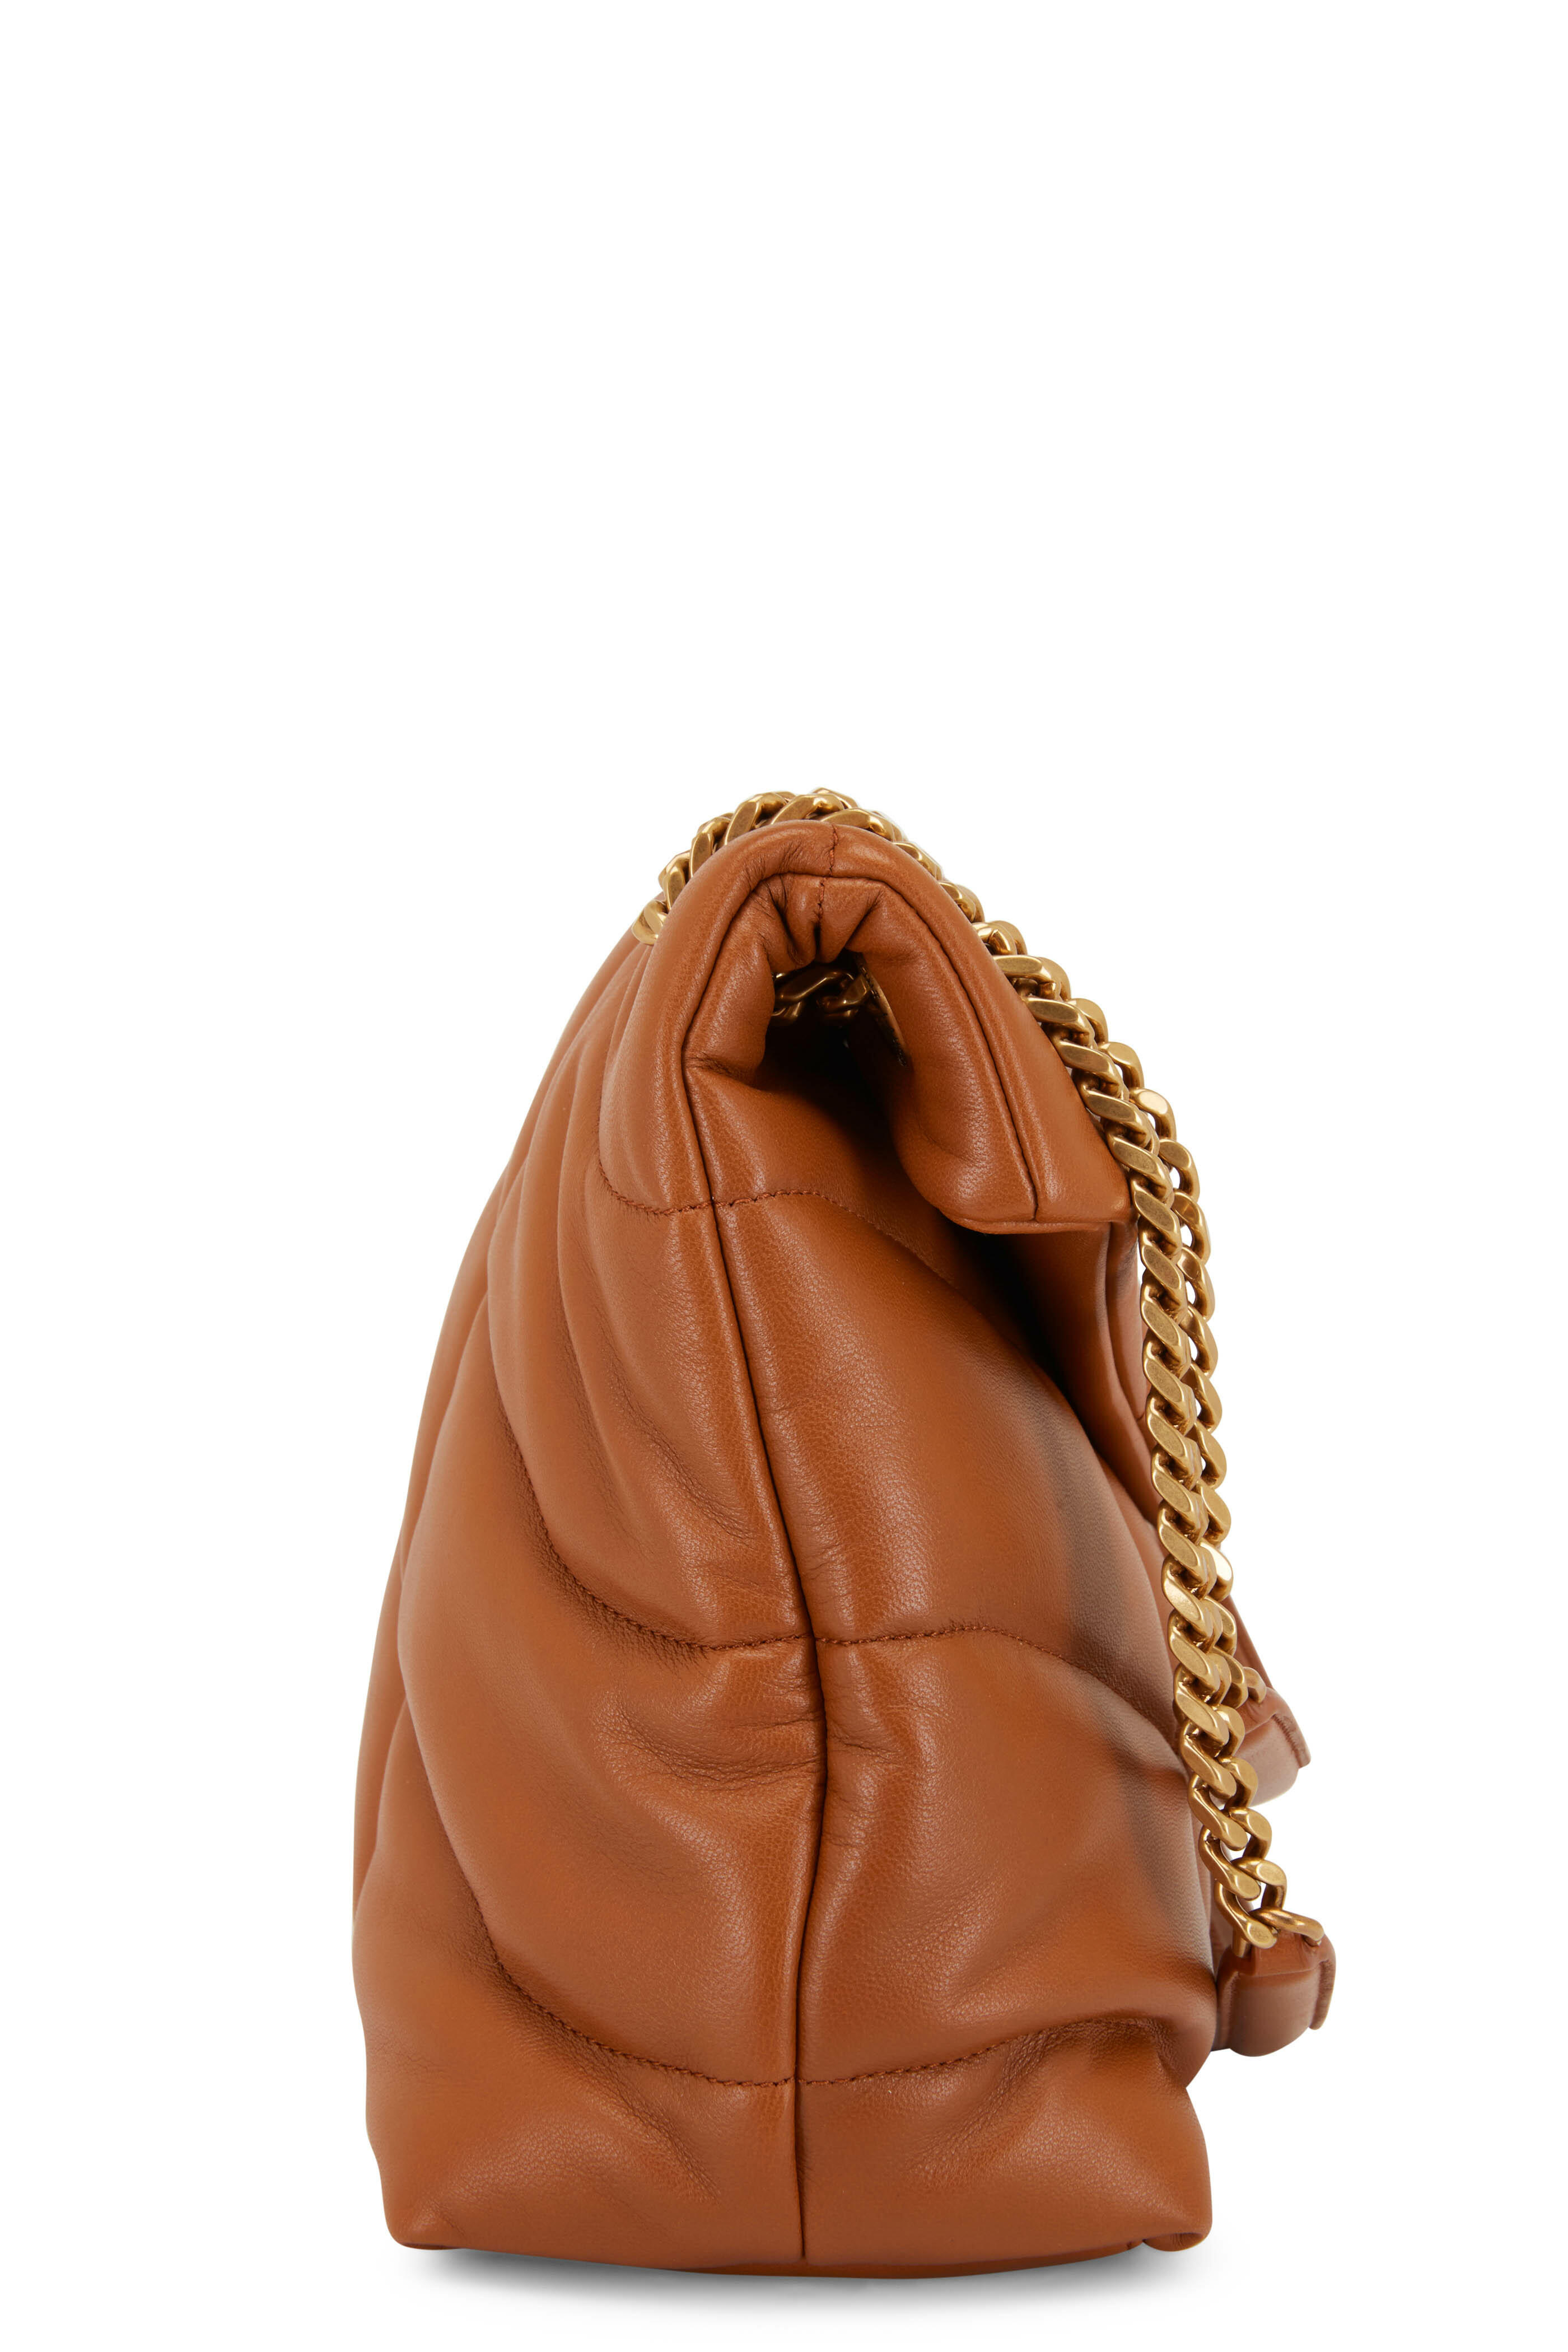  Dark Beige Loulou Small Bag , One Size For female(Brown)